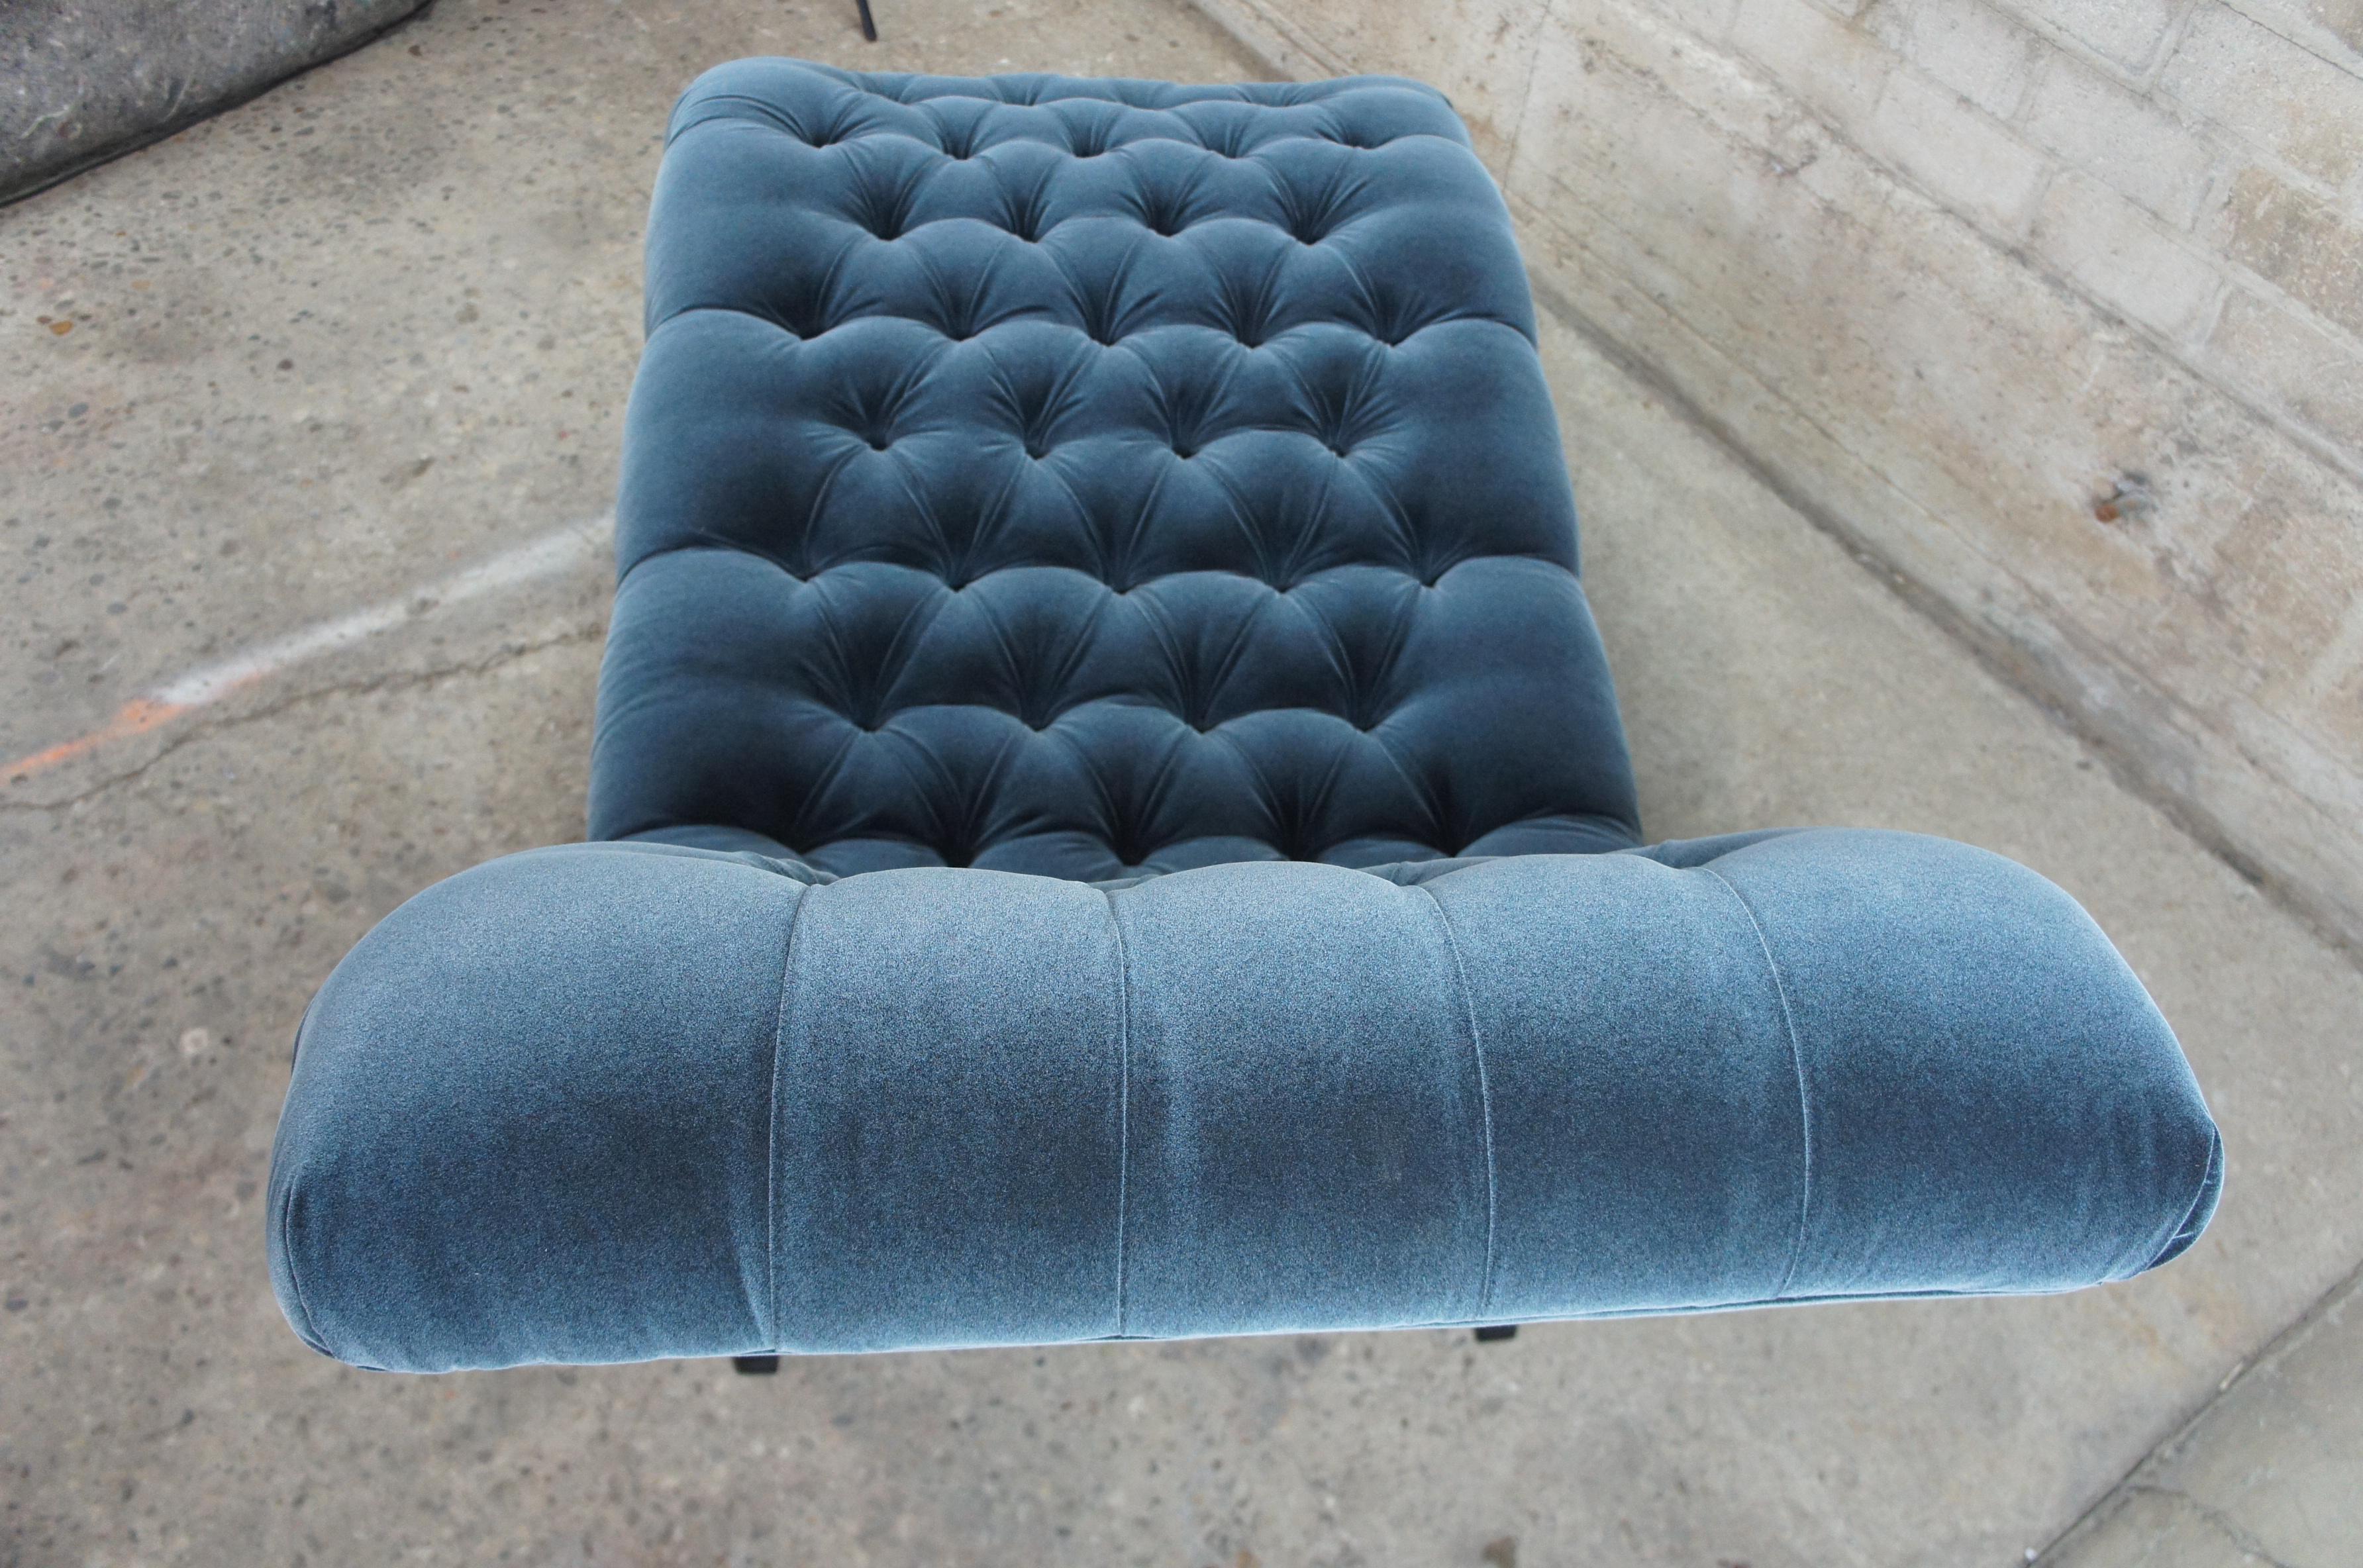 Arhaus Camden Collection Audrey Tufted Blue Velvet Chaise Lounge Chair 1